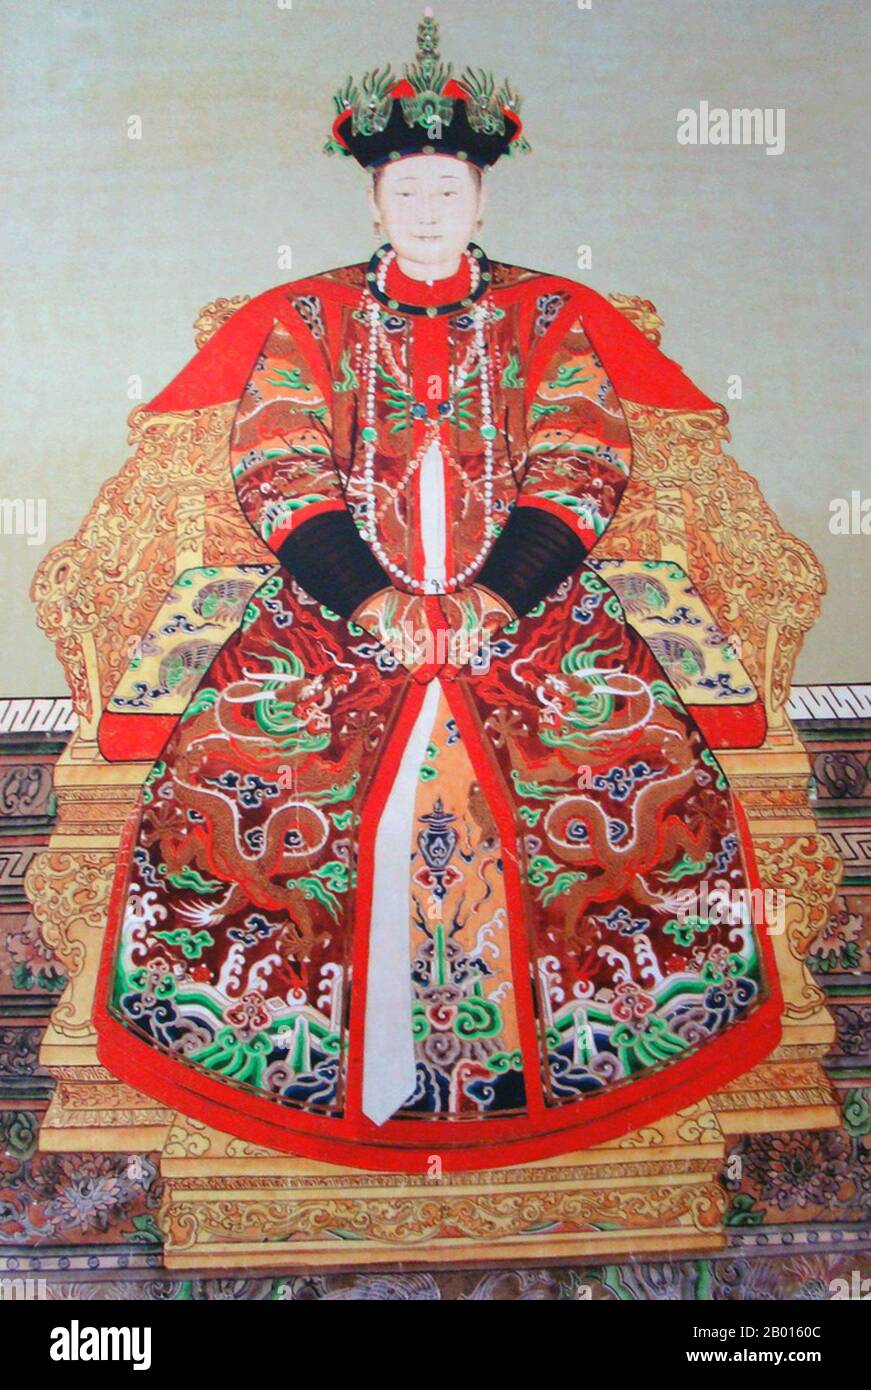 China: Empress Xiao Hui Zhang (5 November 1641 - 7 January 1718) second consort of the Shunzhi Emperor. Hanging scroll painting, late 17th century.  Empress Xiaohuizhang, born Alatan Qiqige, was originally of the Khorchin Mongol Borjigit clan. When Shunzhi's first Empress was demoted in 1653, Xiaohuizhang she was promoted to Consort. One year later she officially became Shunzhi's second Empress. When the Kangxi Emperor ascended the throne, she was honoured as Dowager Empress Renxian, although she was not the biological mother of the new emperor. Stock Photo